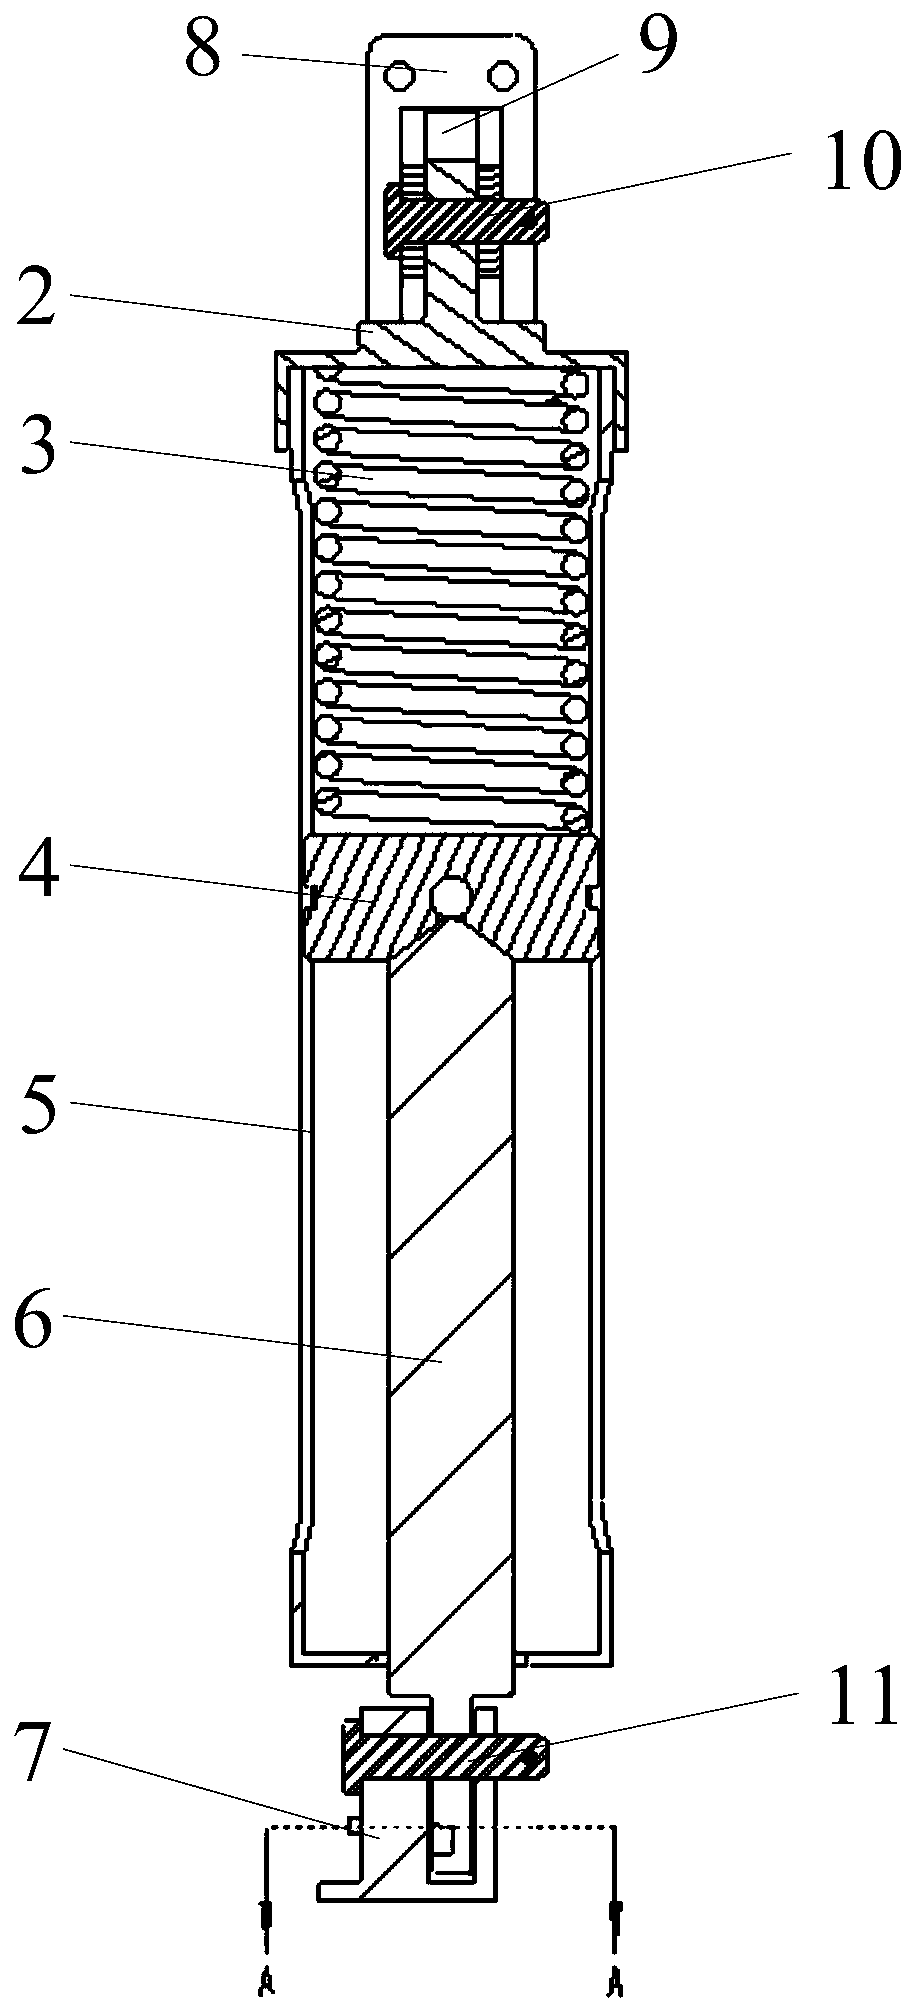 Rotary separation spring actuating device